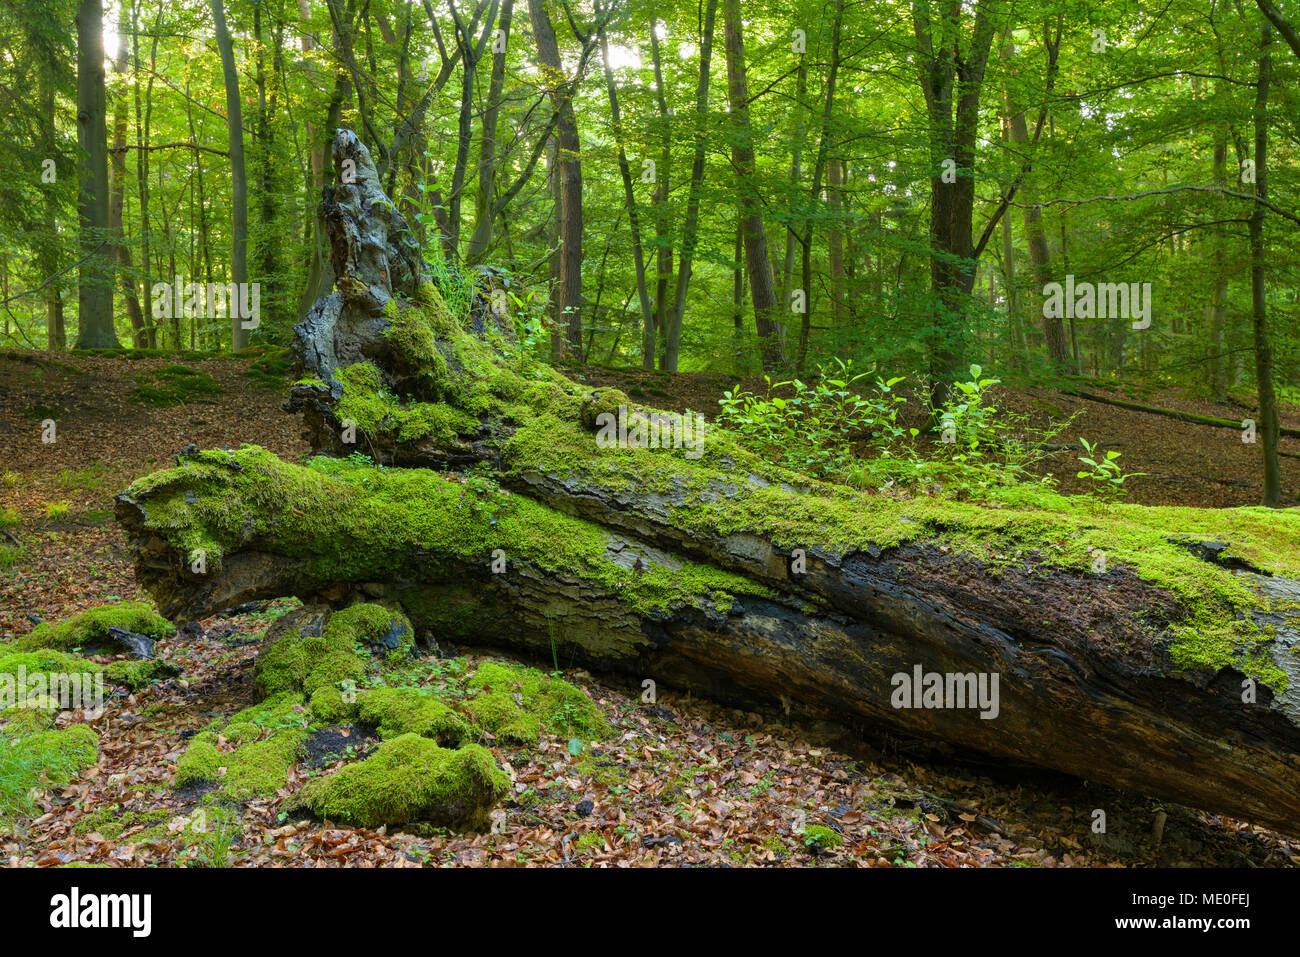 Old, fallen tree trunk covered in moss in forest in Hesse, Germany Stock Photo